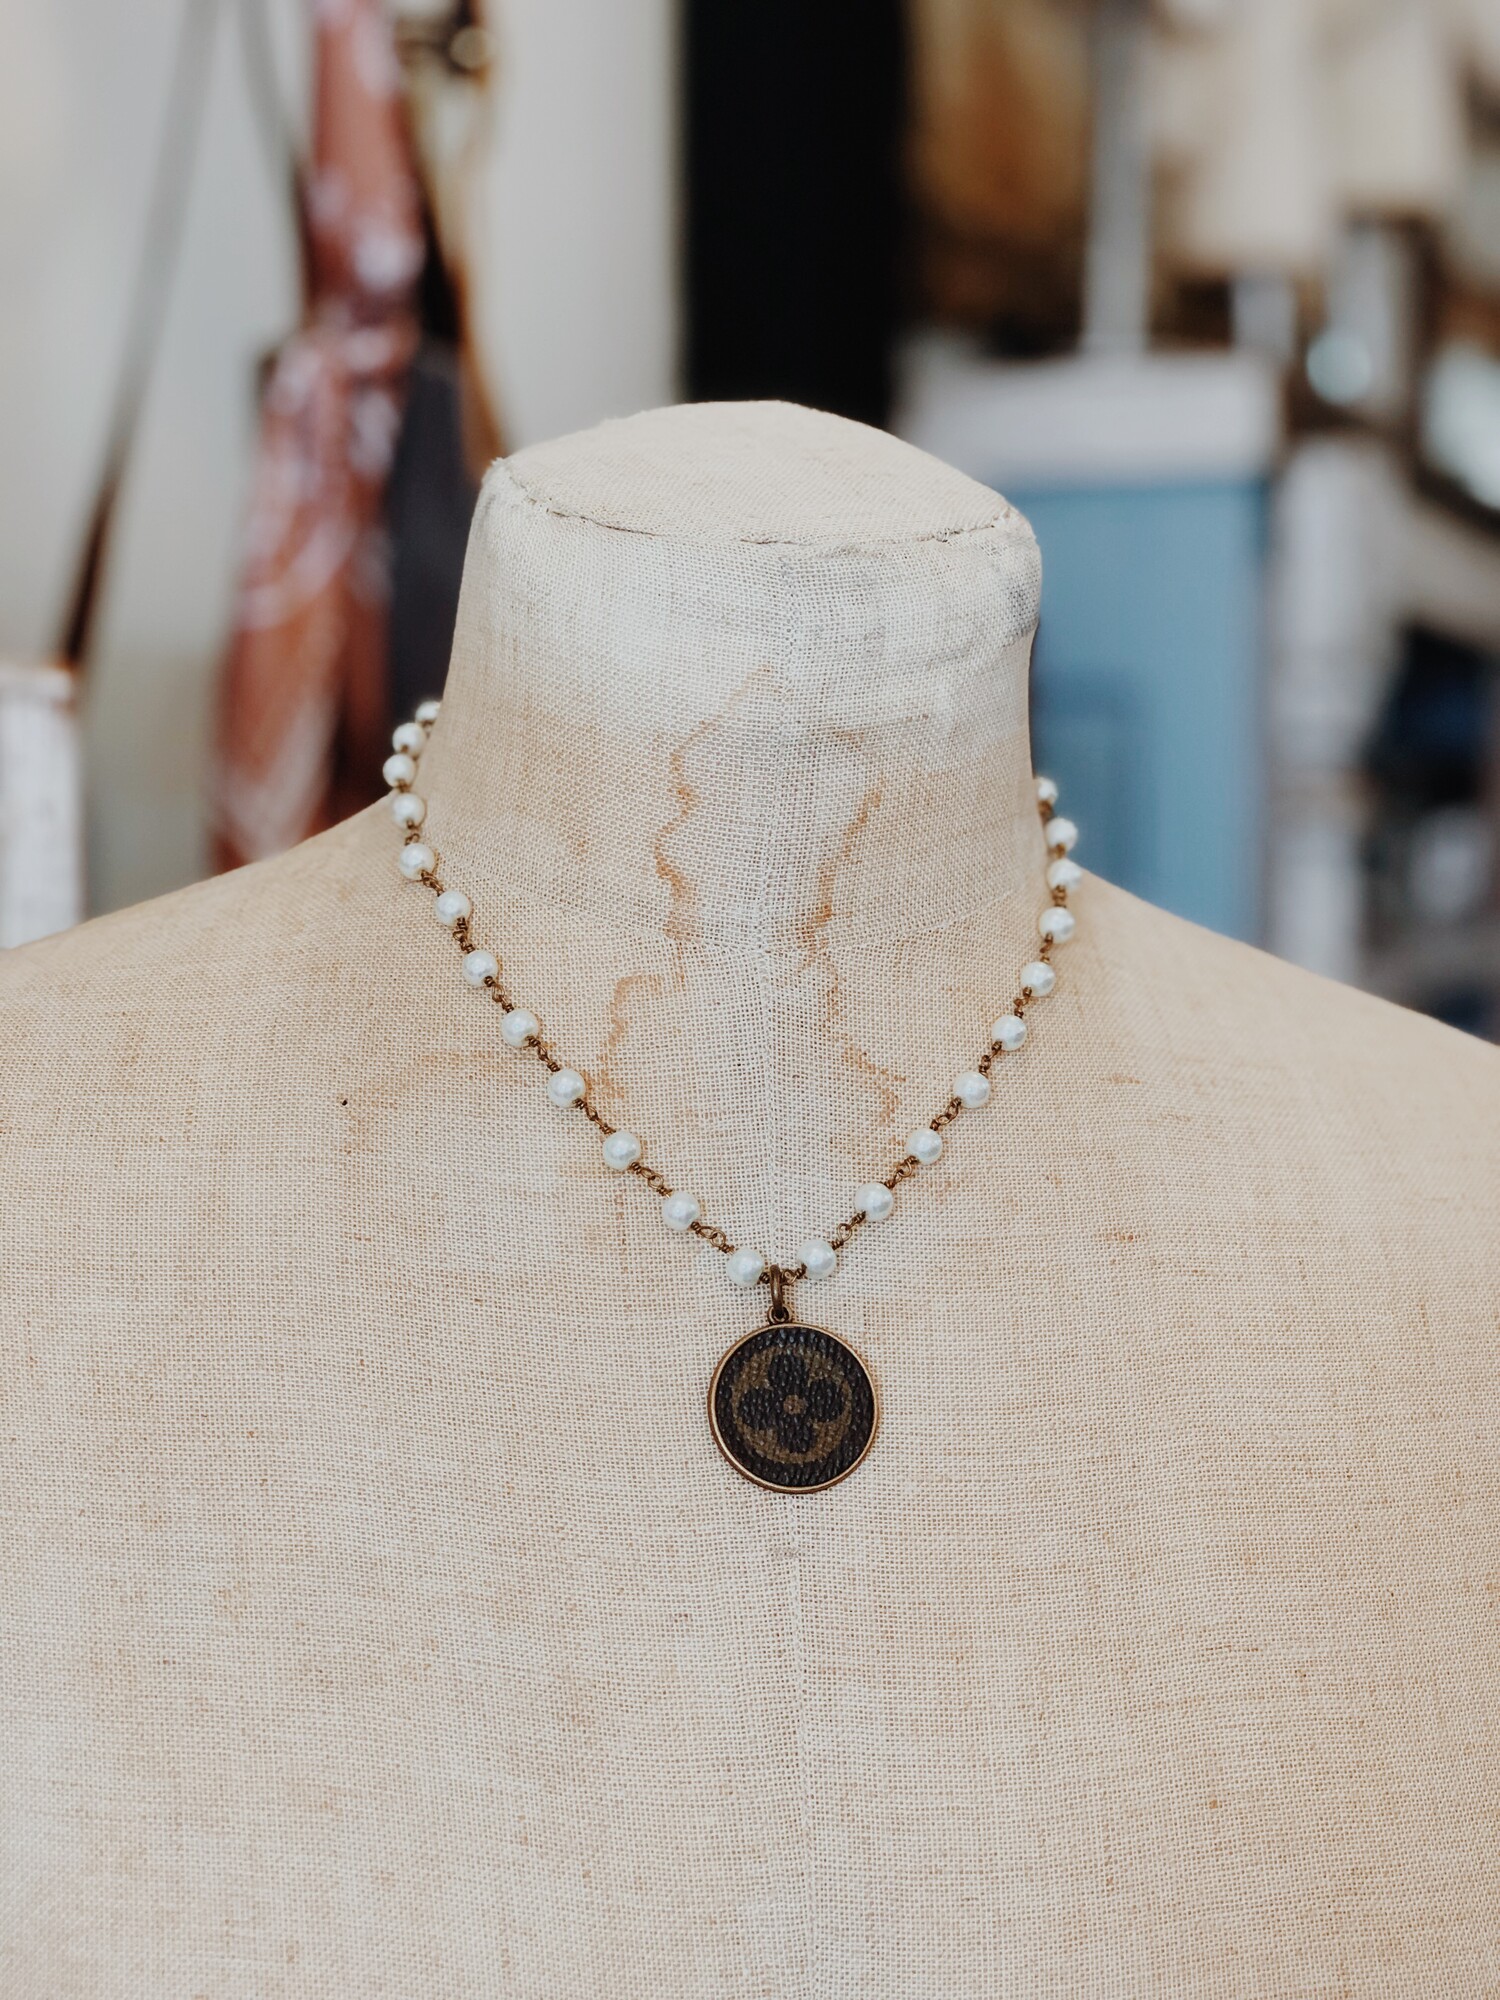 This gorgeous upcycled, handmade necklace was made from an authentic Louis Vuitton bag!

The chain measures 17 inches in length.

Resurrect Antiques is not affiliated with the LV company.
The bag's date code is SP0927